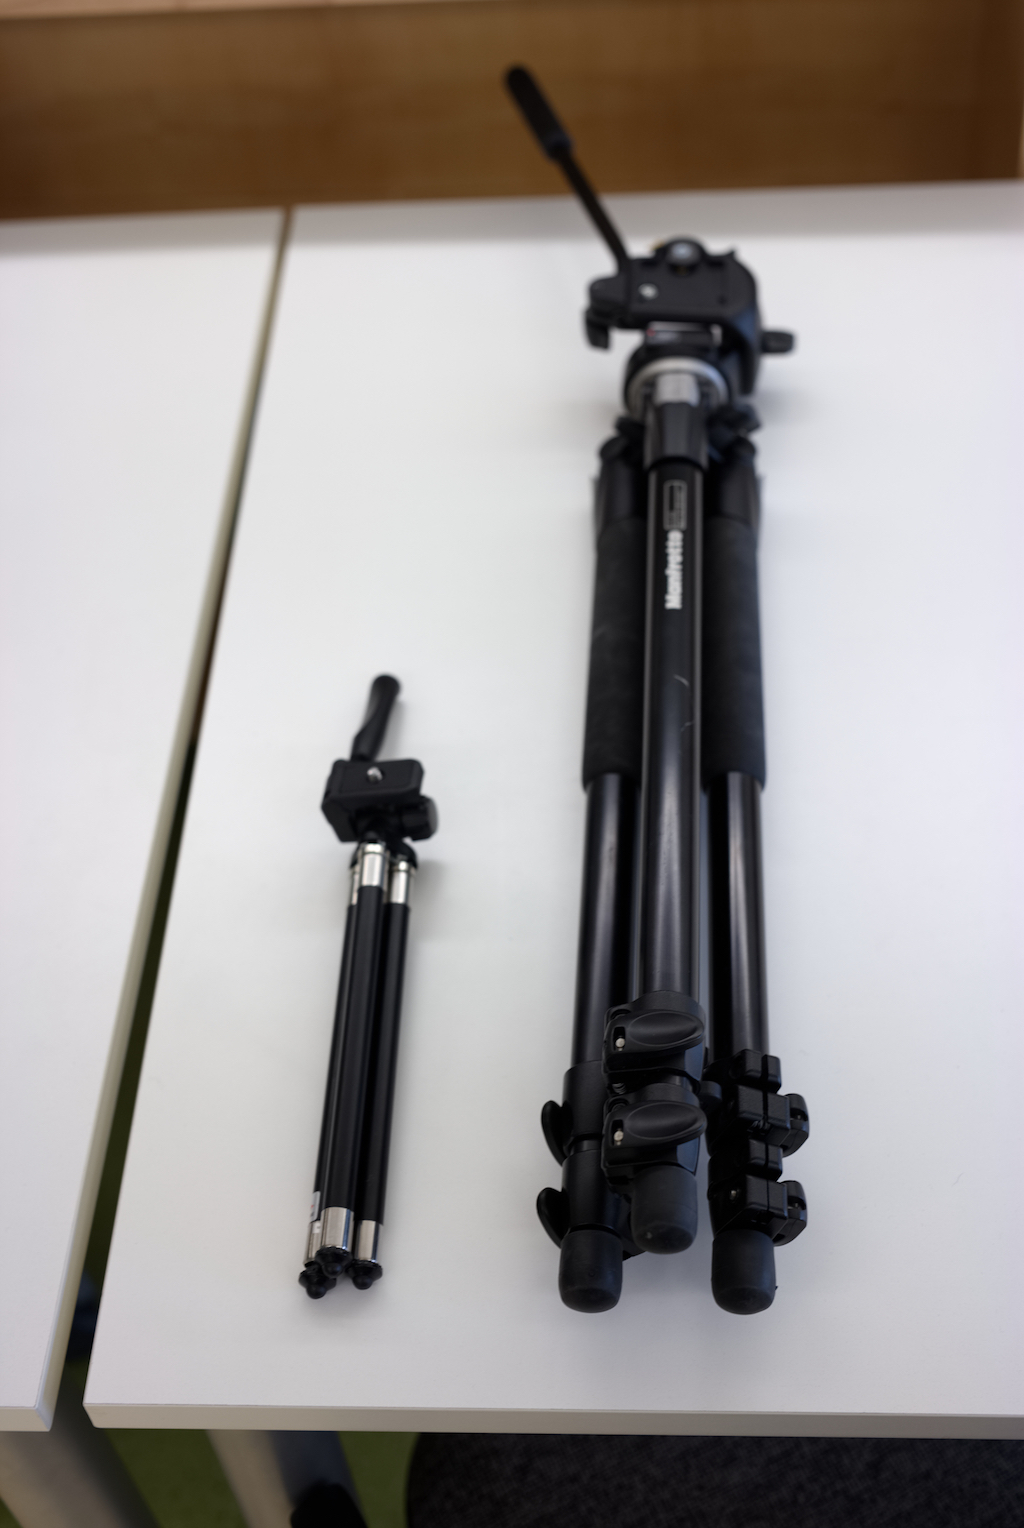 A picture of two tripods on a table